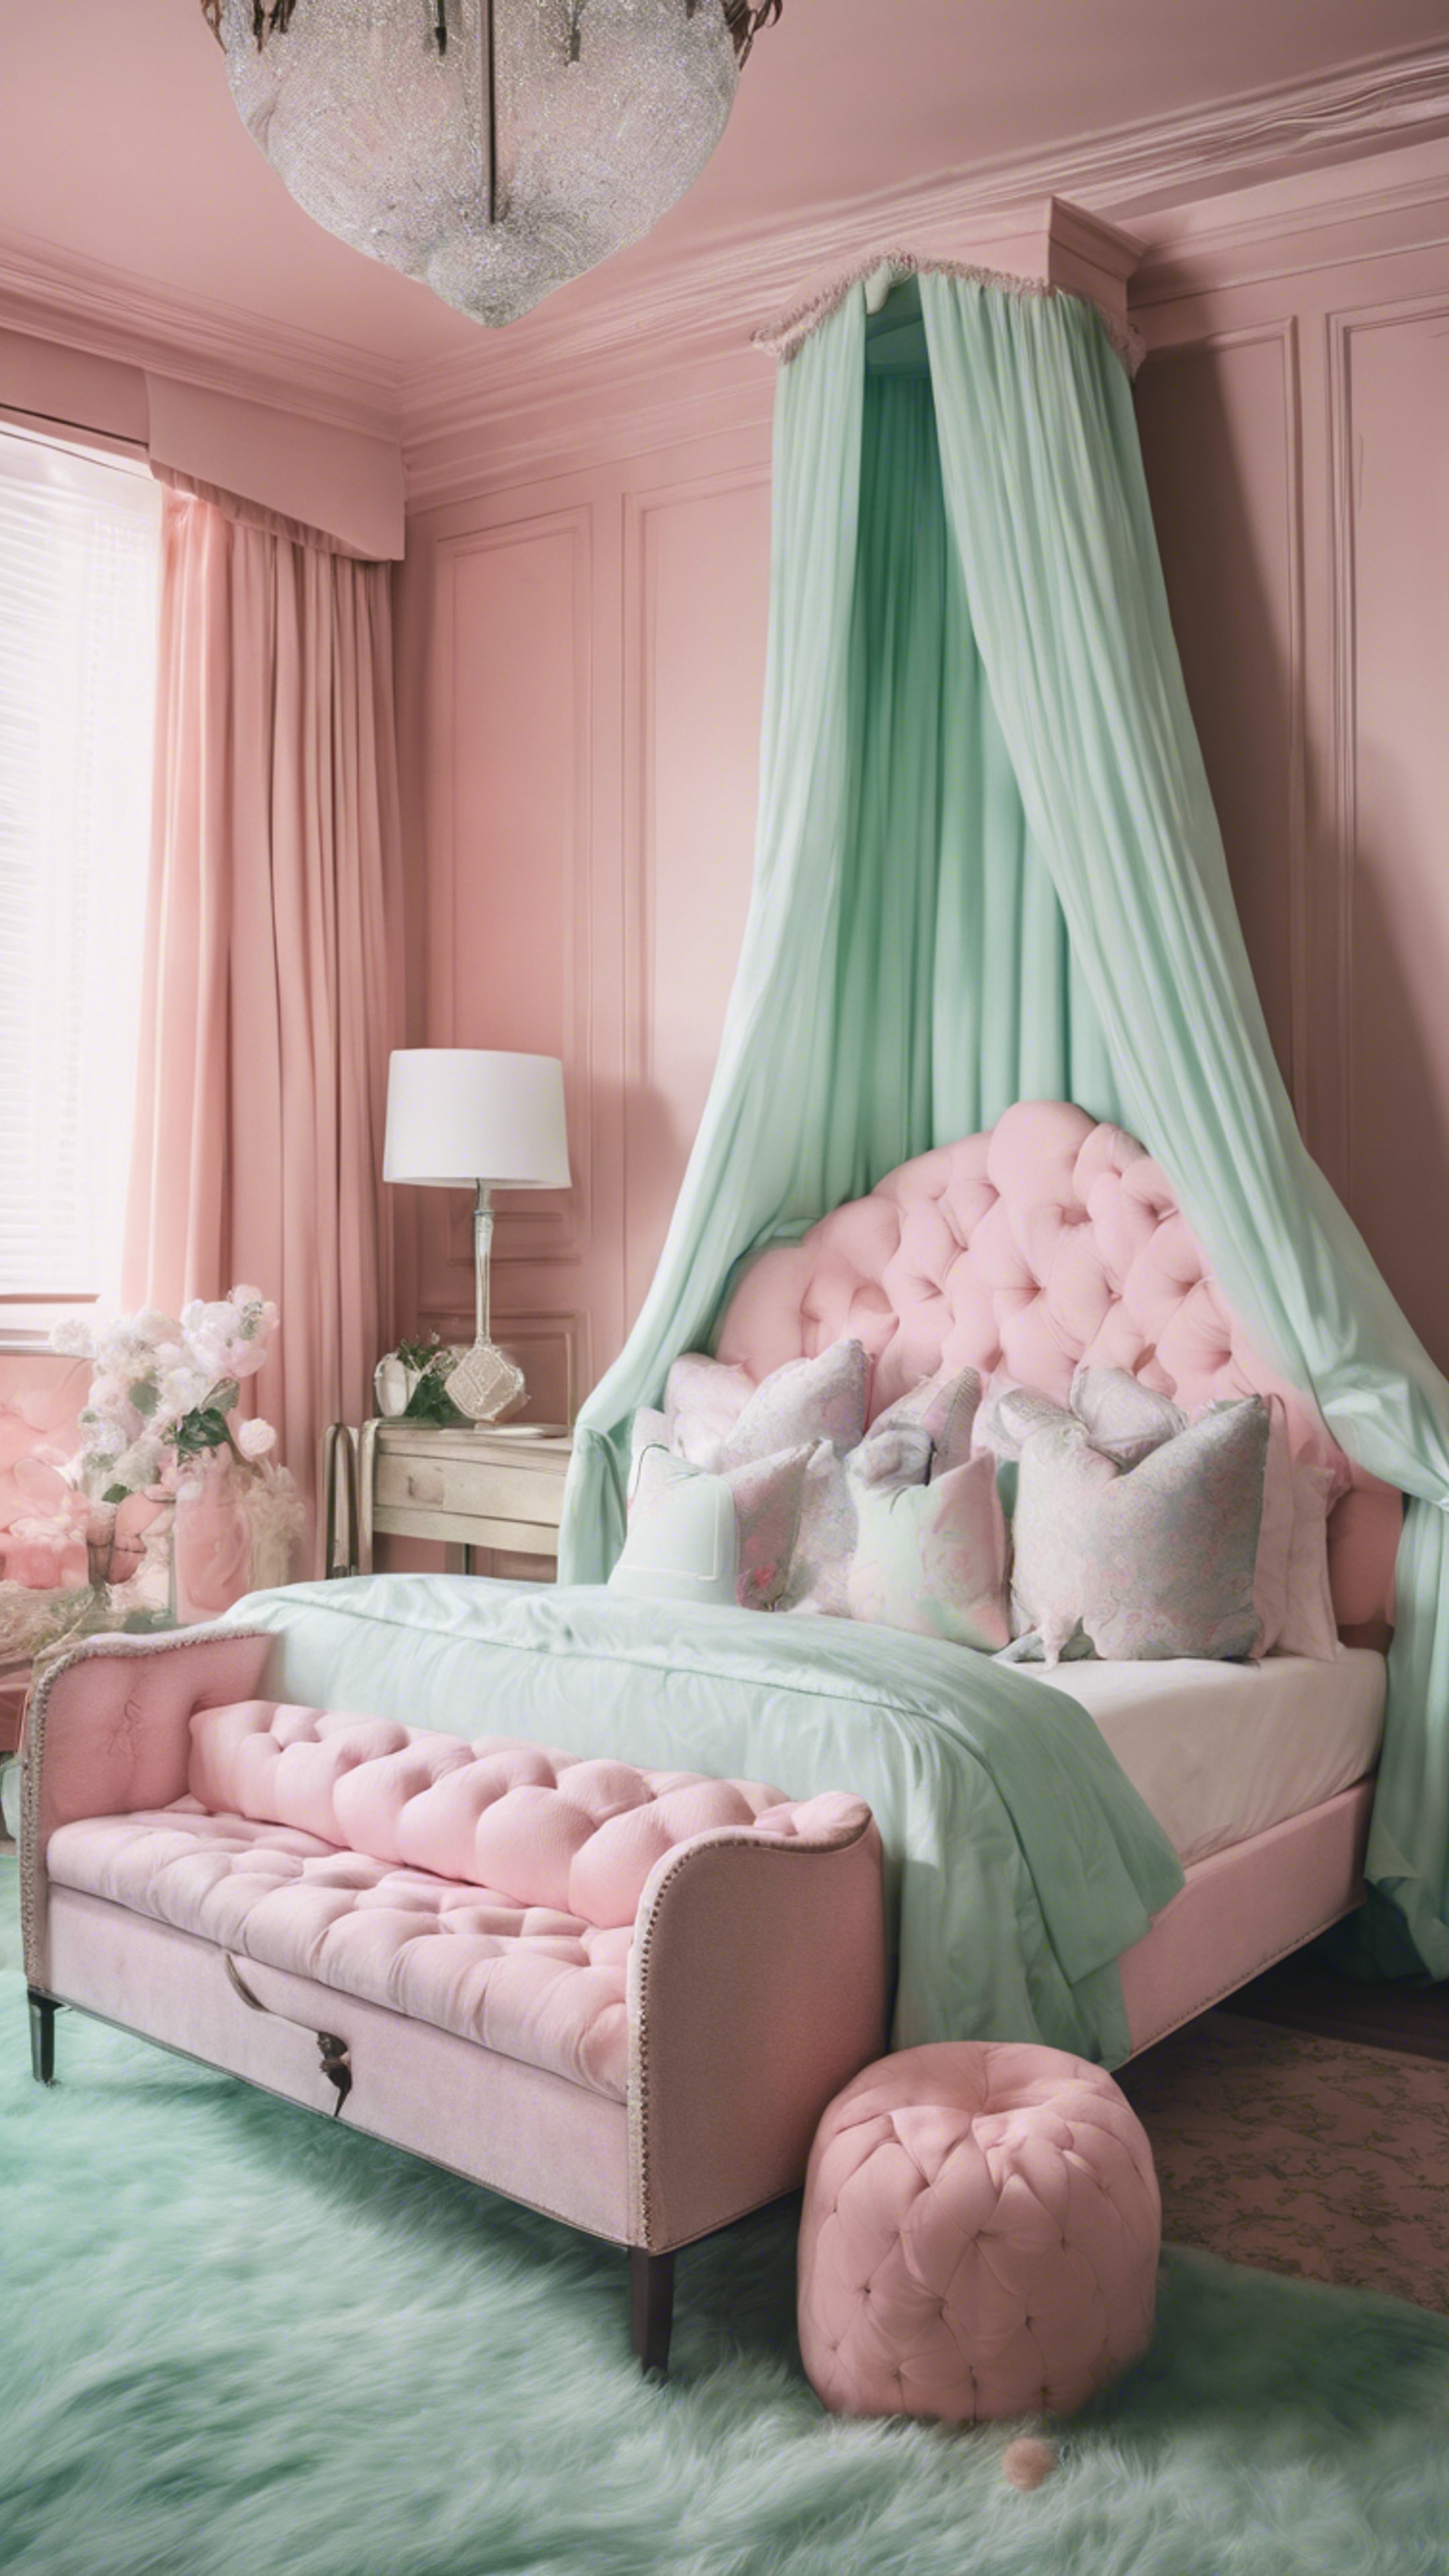 A sprawling pink and mint green preppy-style bedroom with a canopy bed and monogrammed pillows. Sfondo[80ed71ae36e84fc093e2]